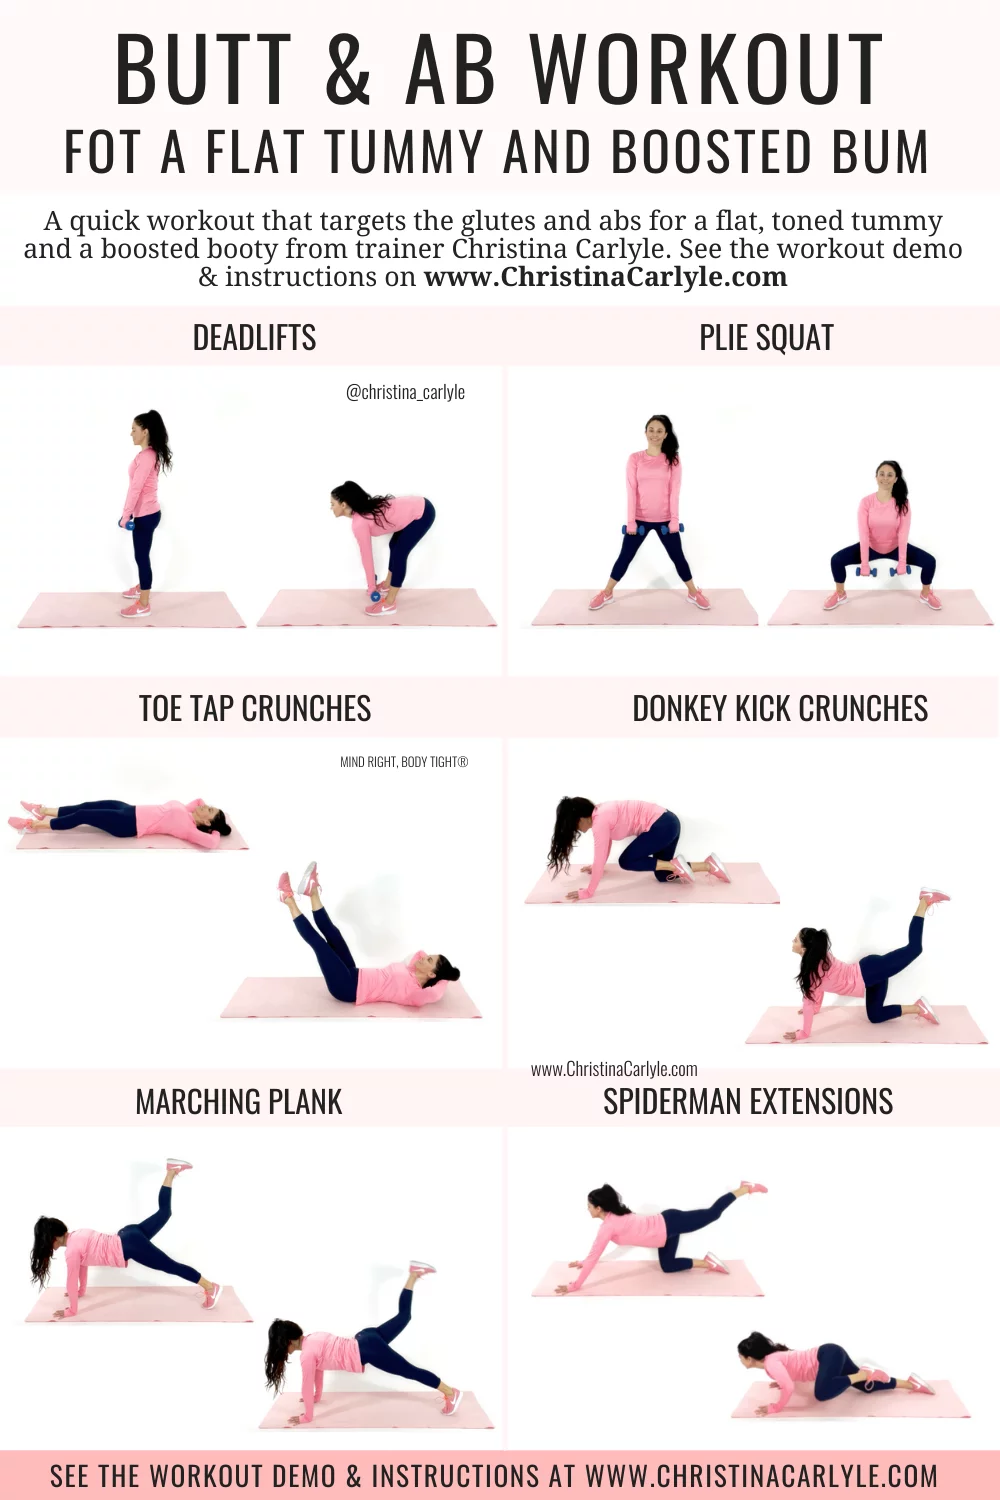 Butts and Guts Workout for Flat Abs and a Bubble Butt - Christina Carlyle